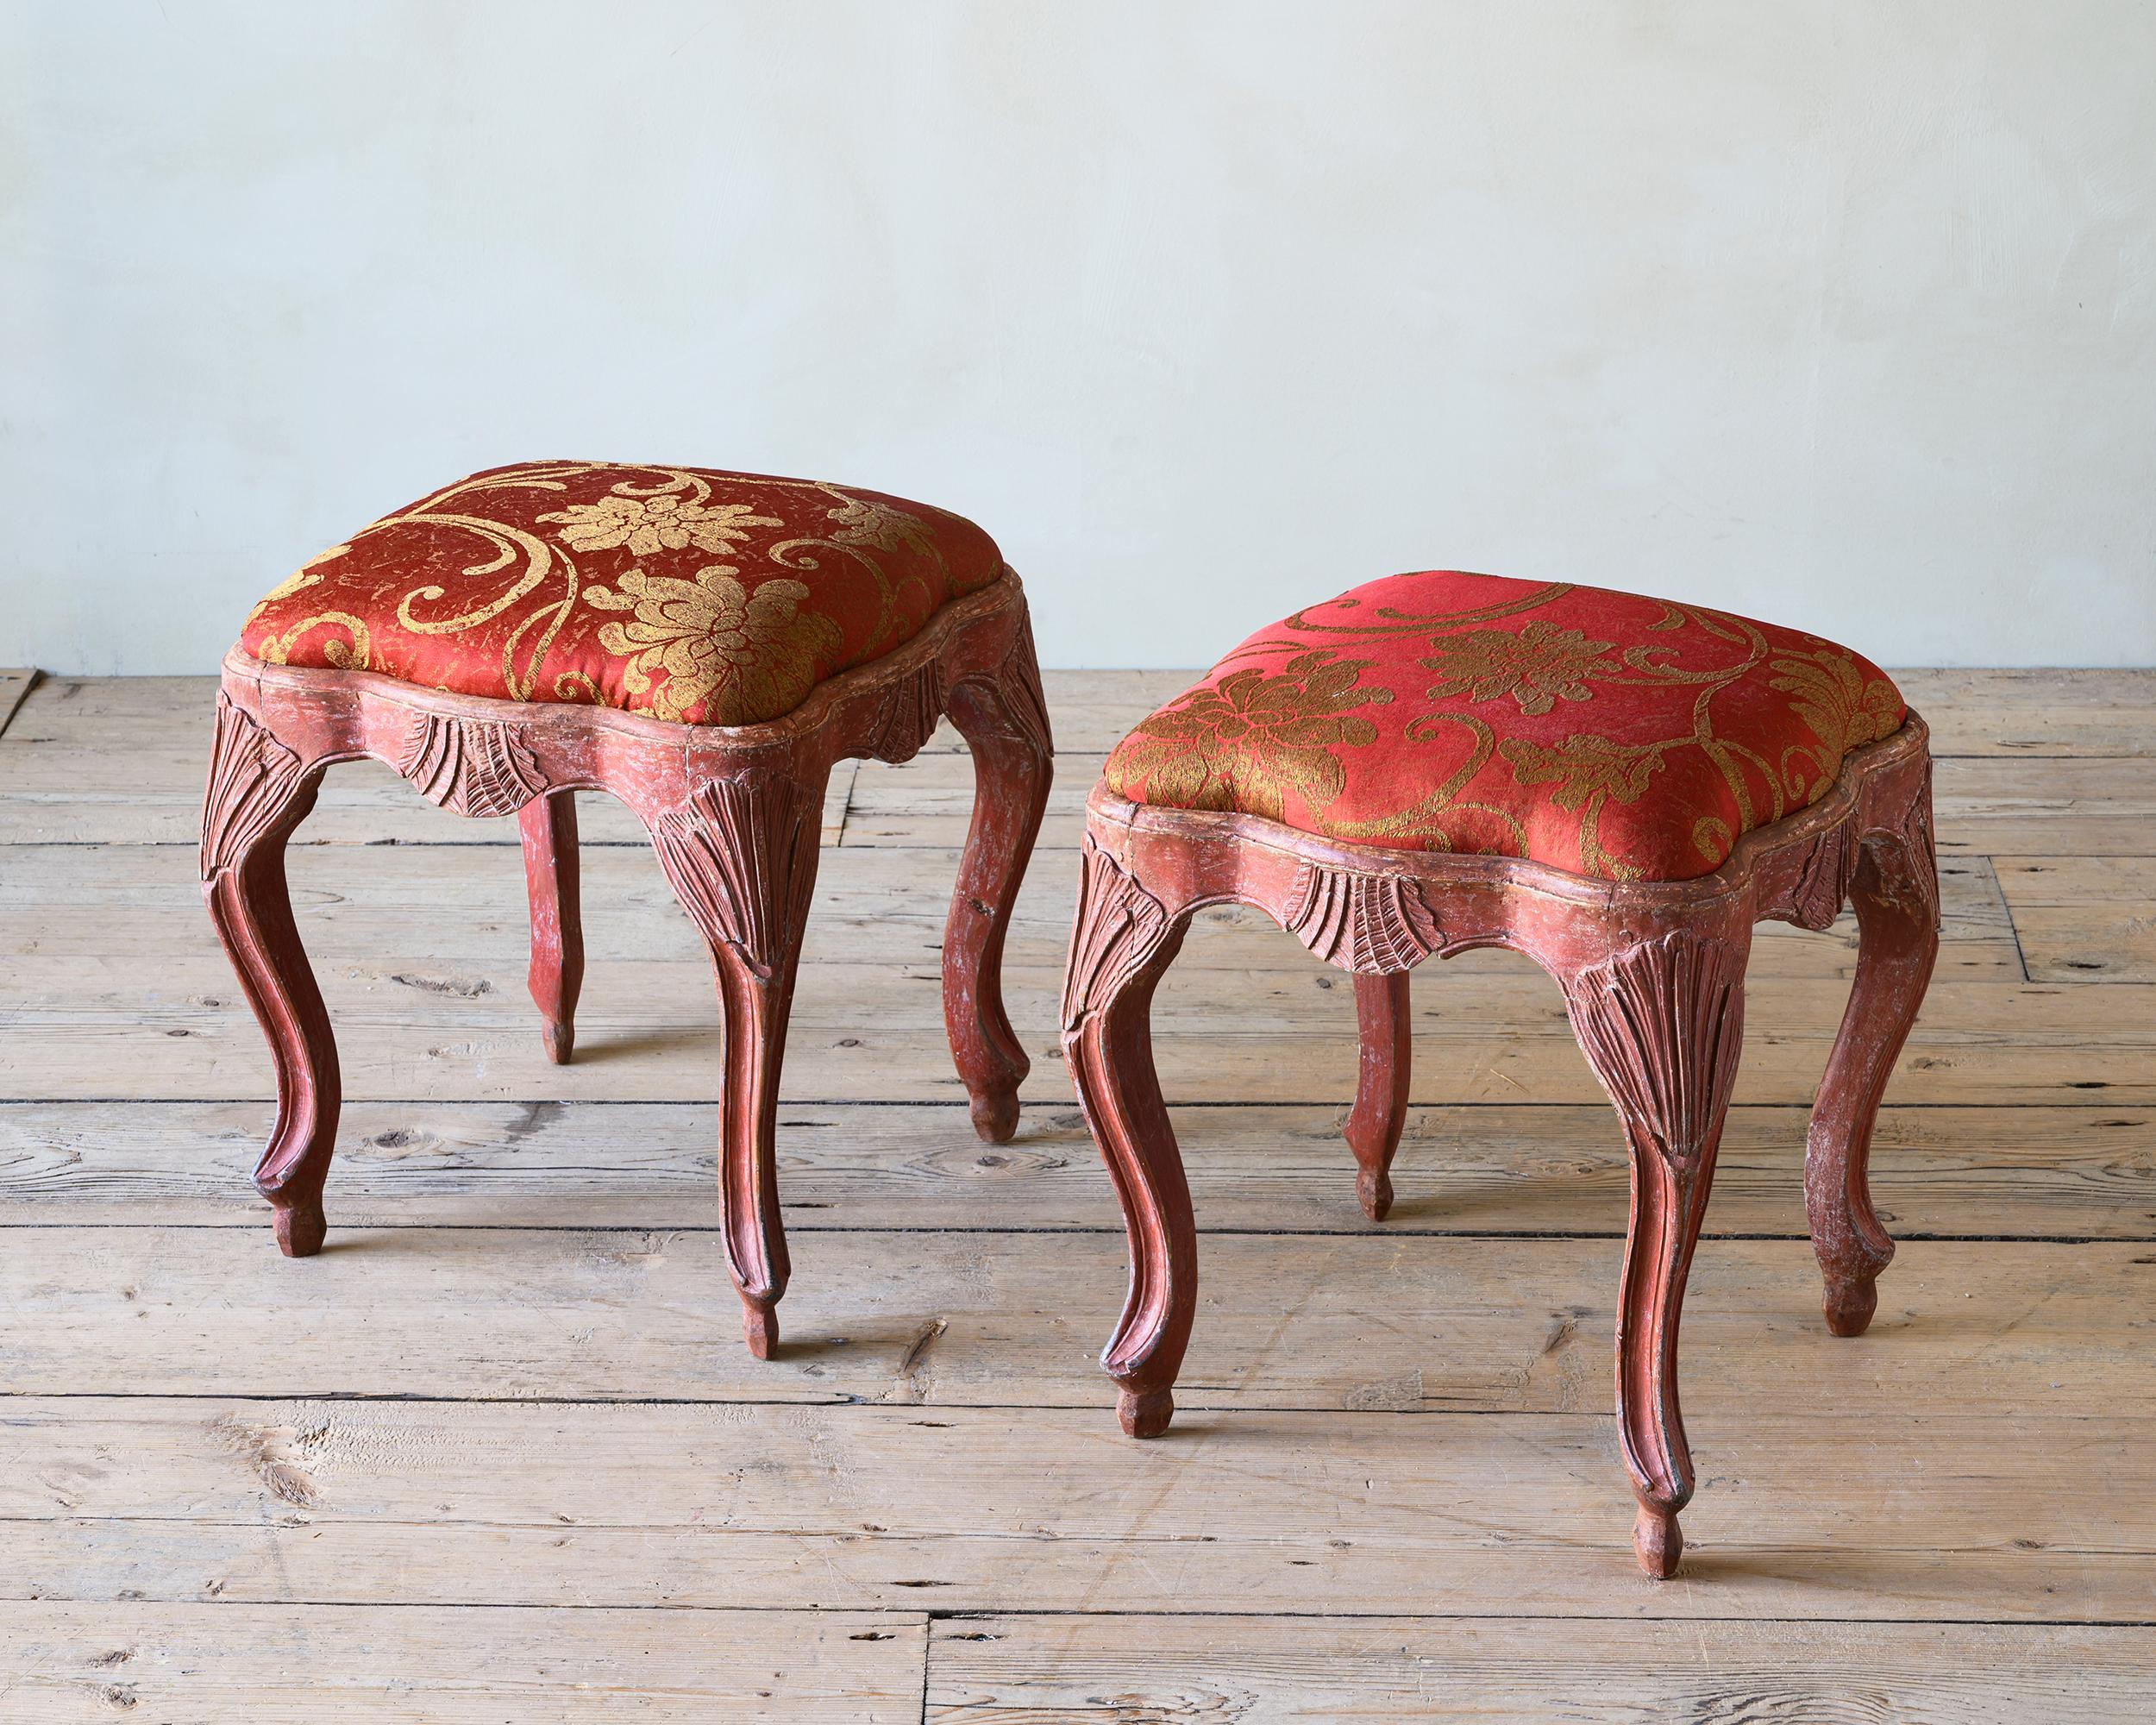 Exceptional pair of 18th century Rococo stools in their original finish, great proportions and carvings, Stockholm, Sweden, Signed & Dated - J: 20 May 1774.

Provenance: Lars Sjöberg's private collection. Sjöberg is a Swedish art historian and